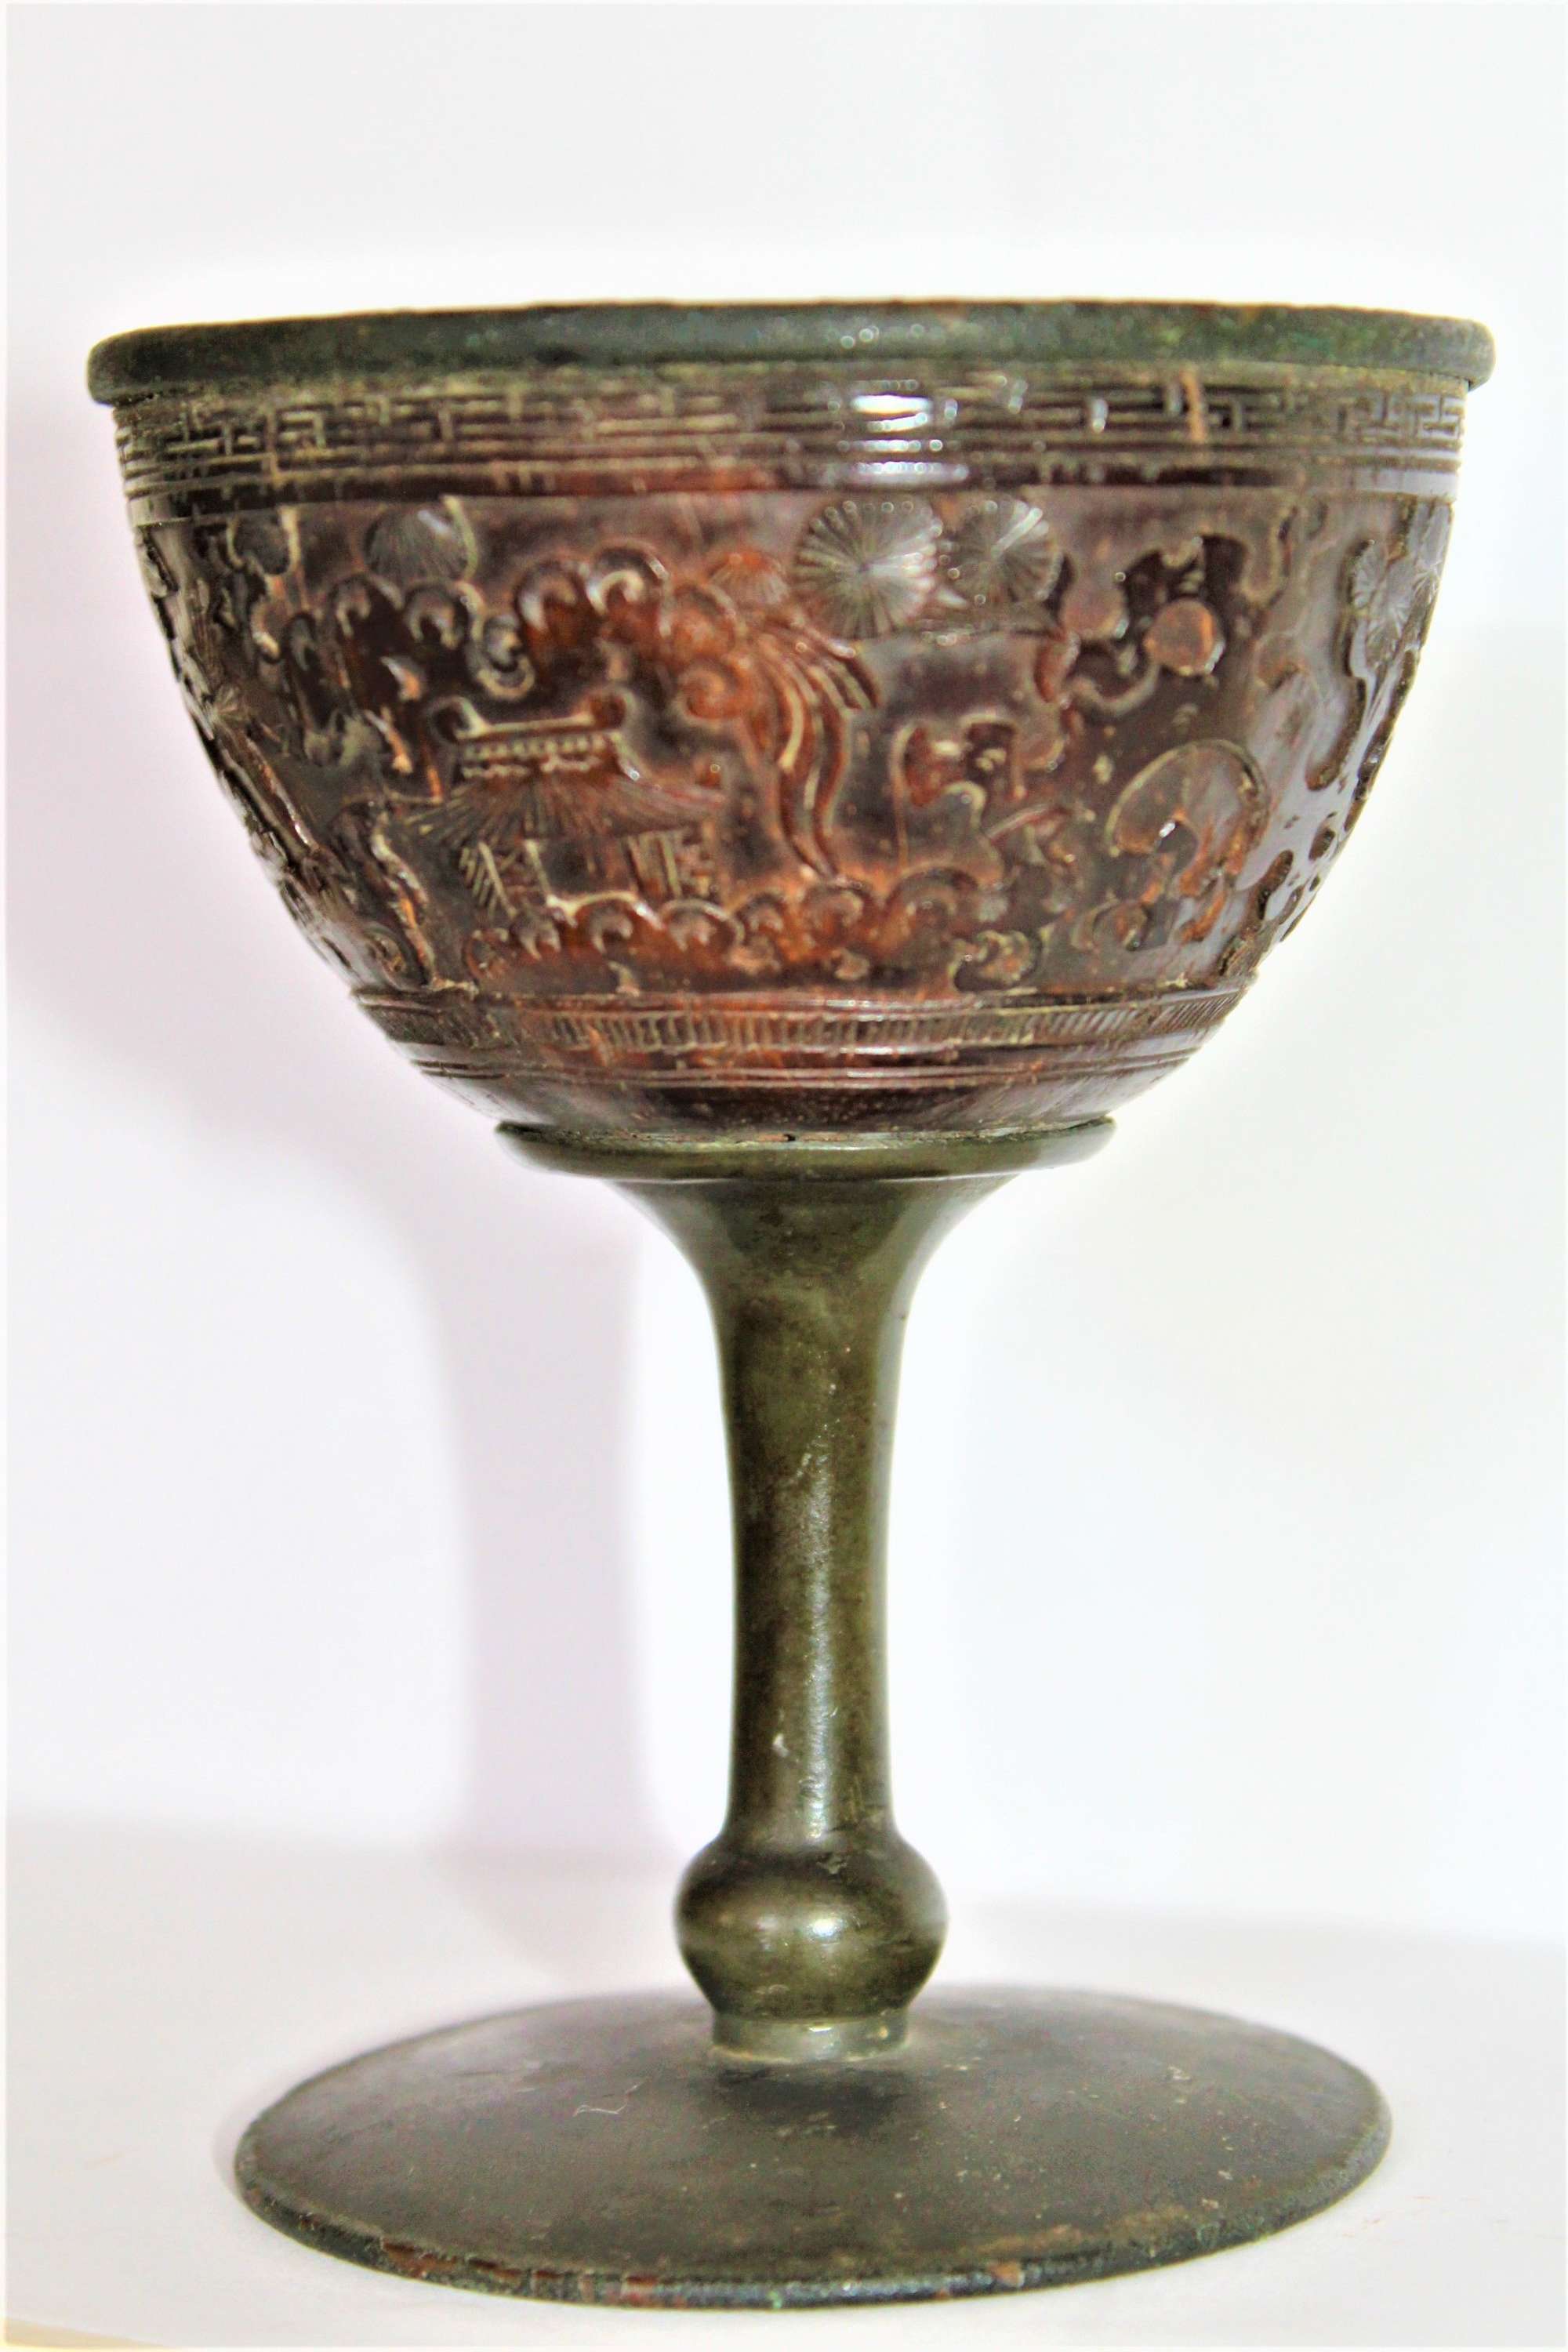 A Chinese Pewter Drinking Cup Wrapped In An Intricately Carved Coconut